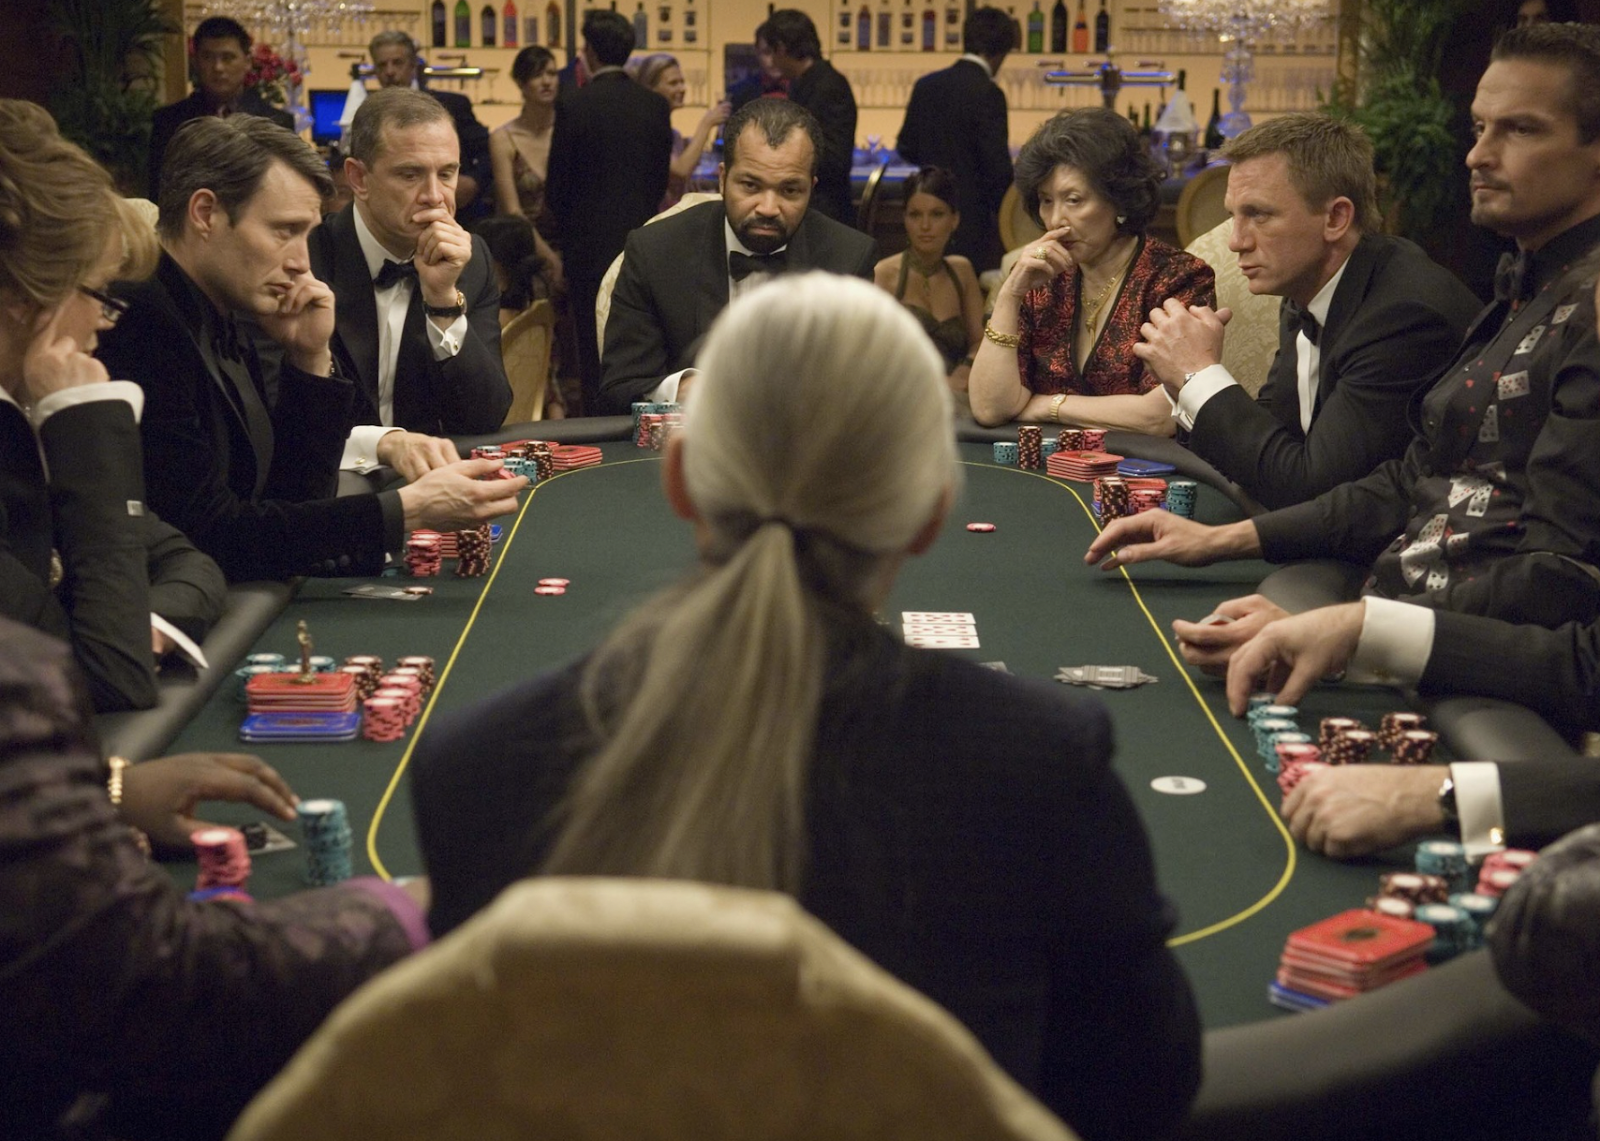 Around the poker table of a scene in casino royale